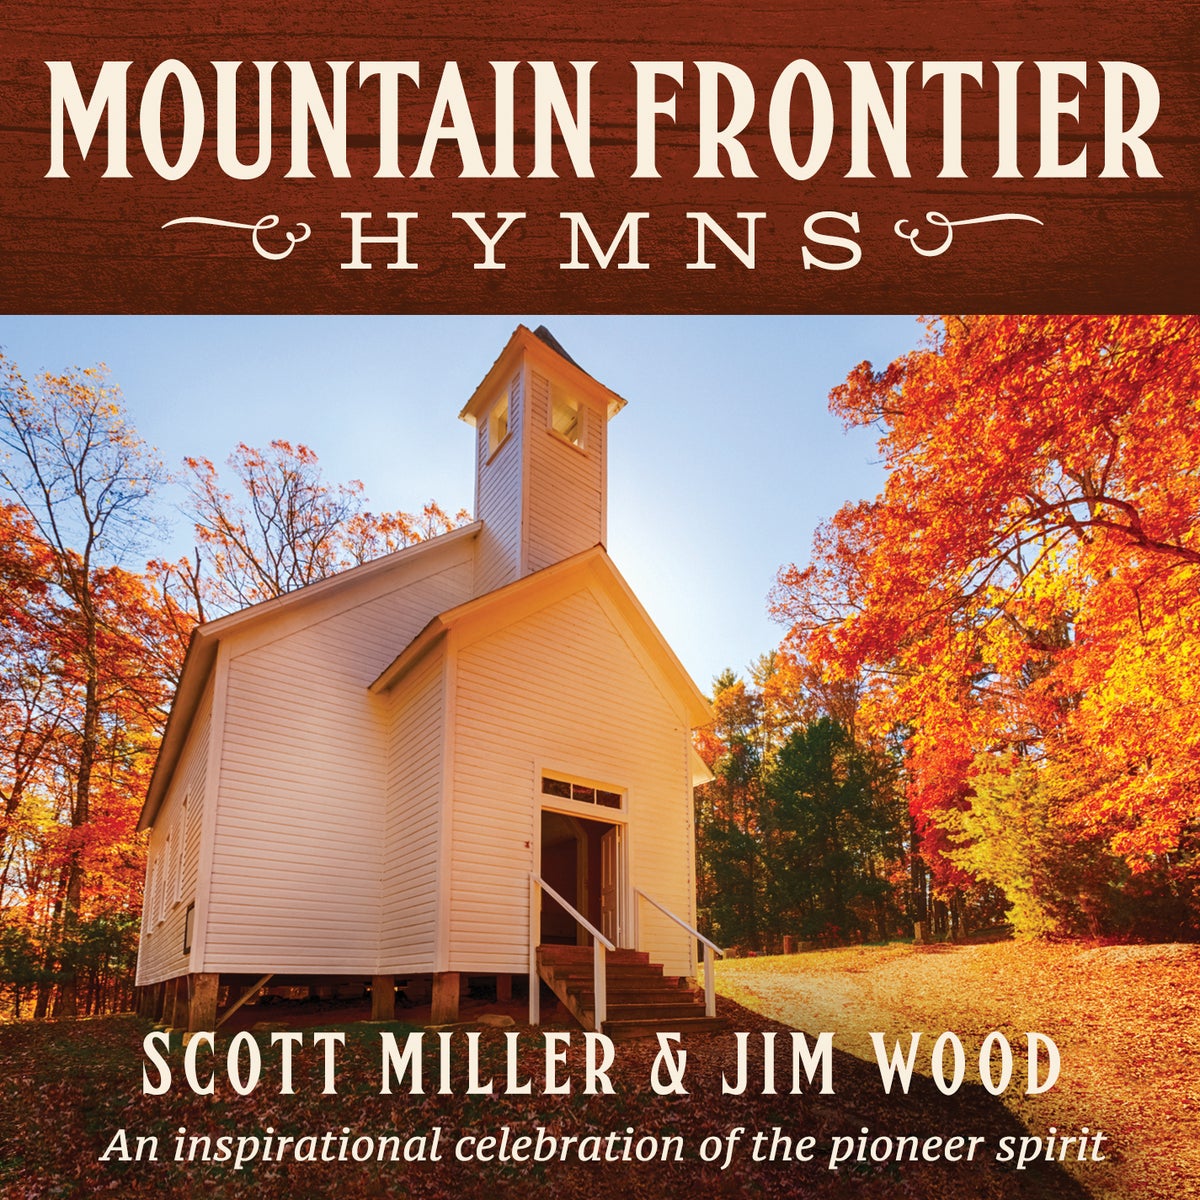 MOUNTAIN FRONTIER HYMNS